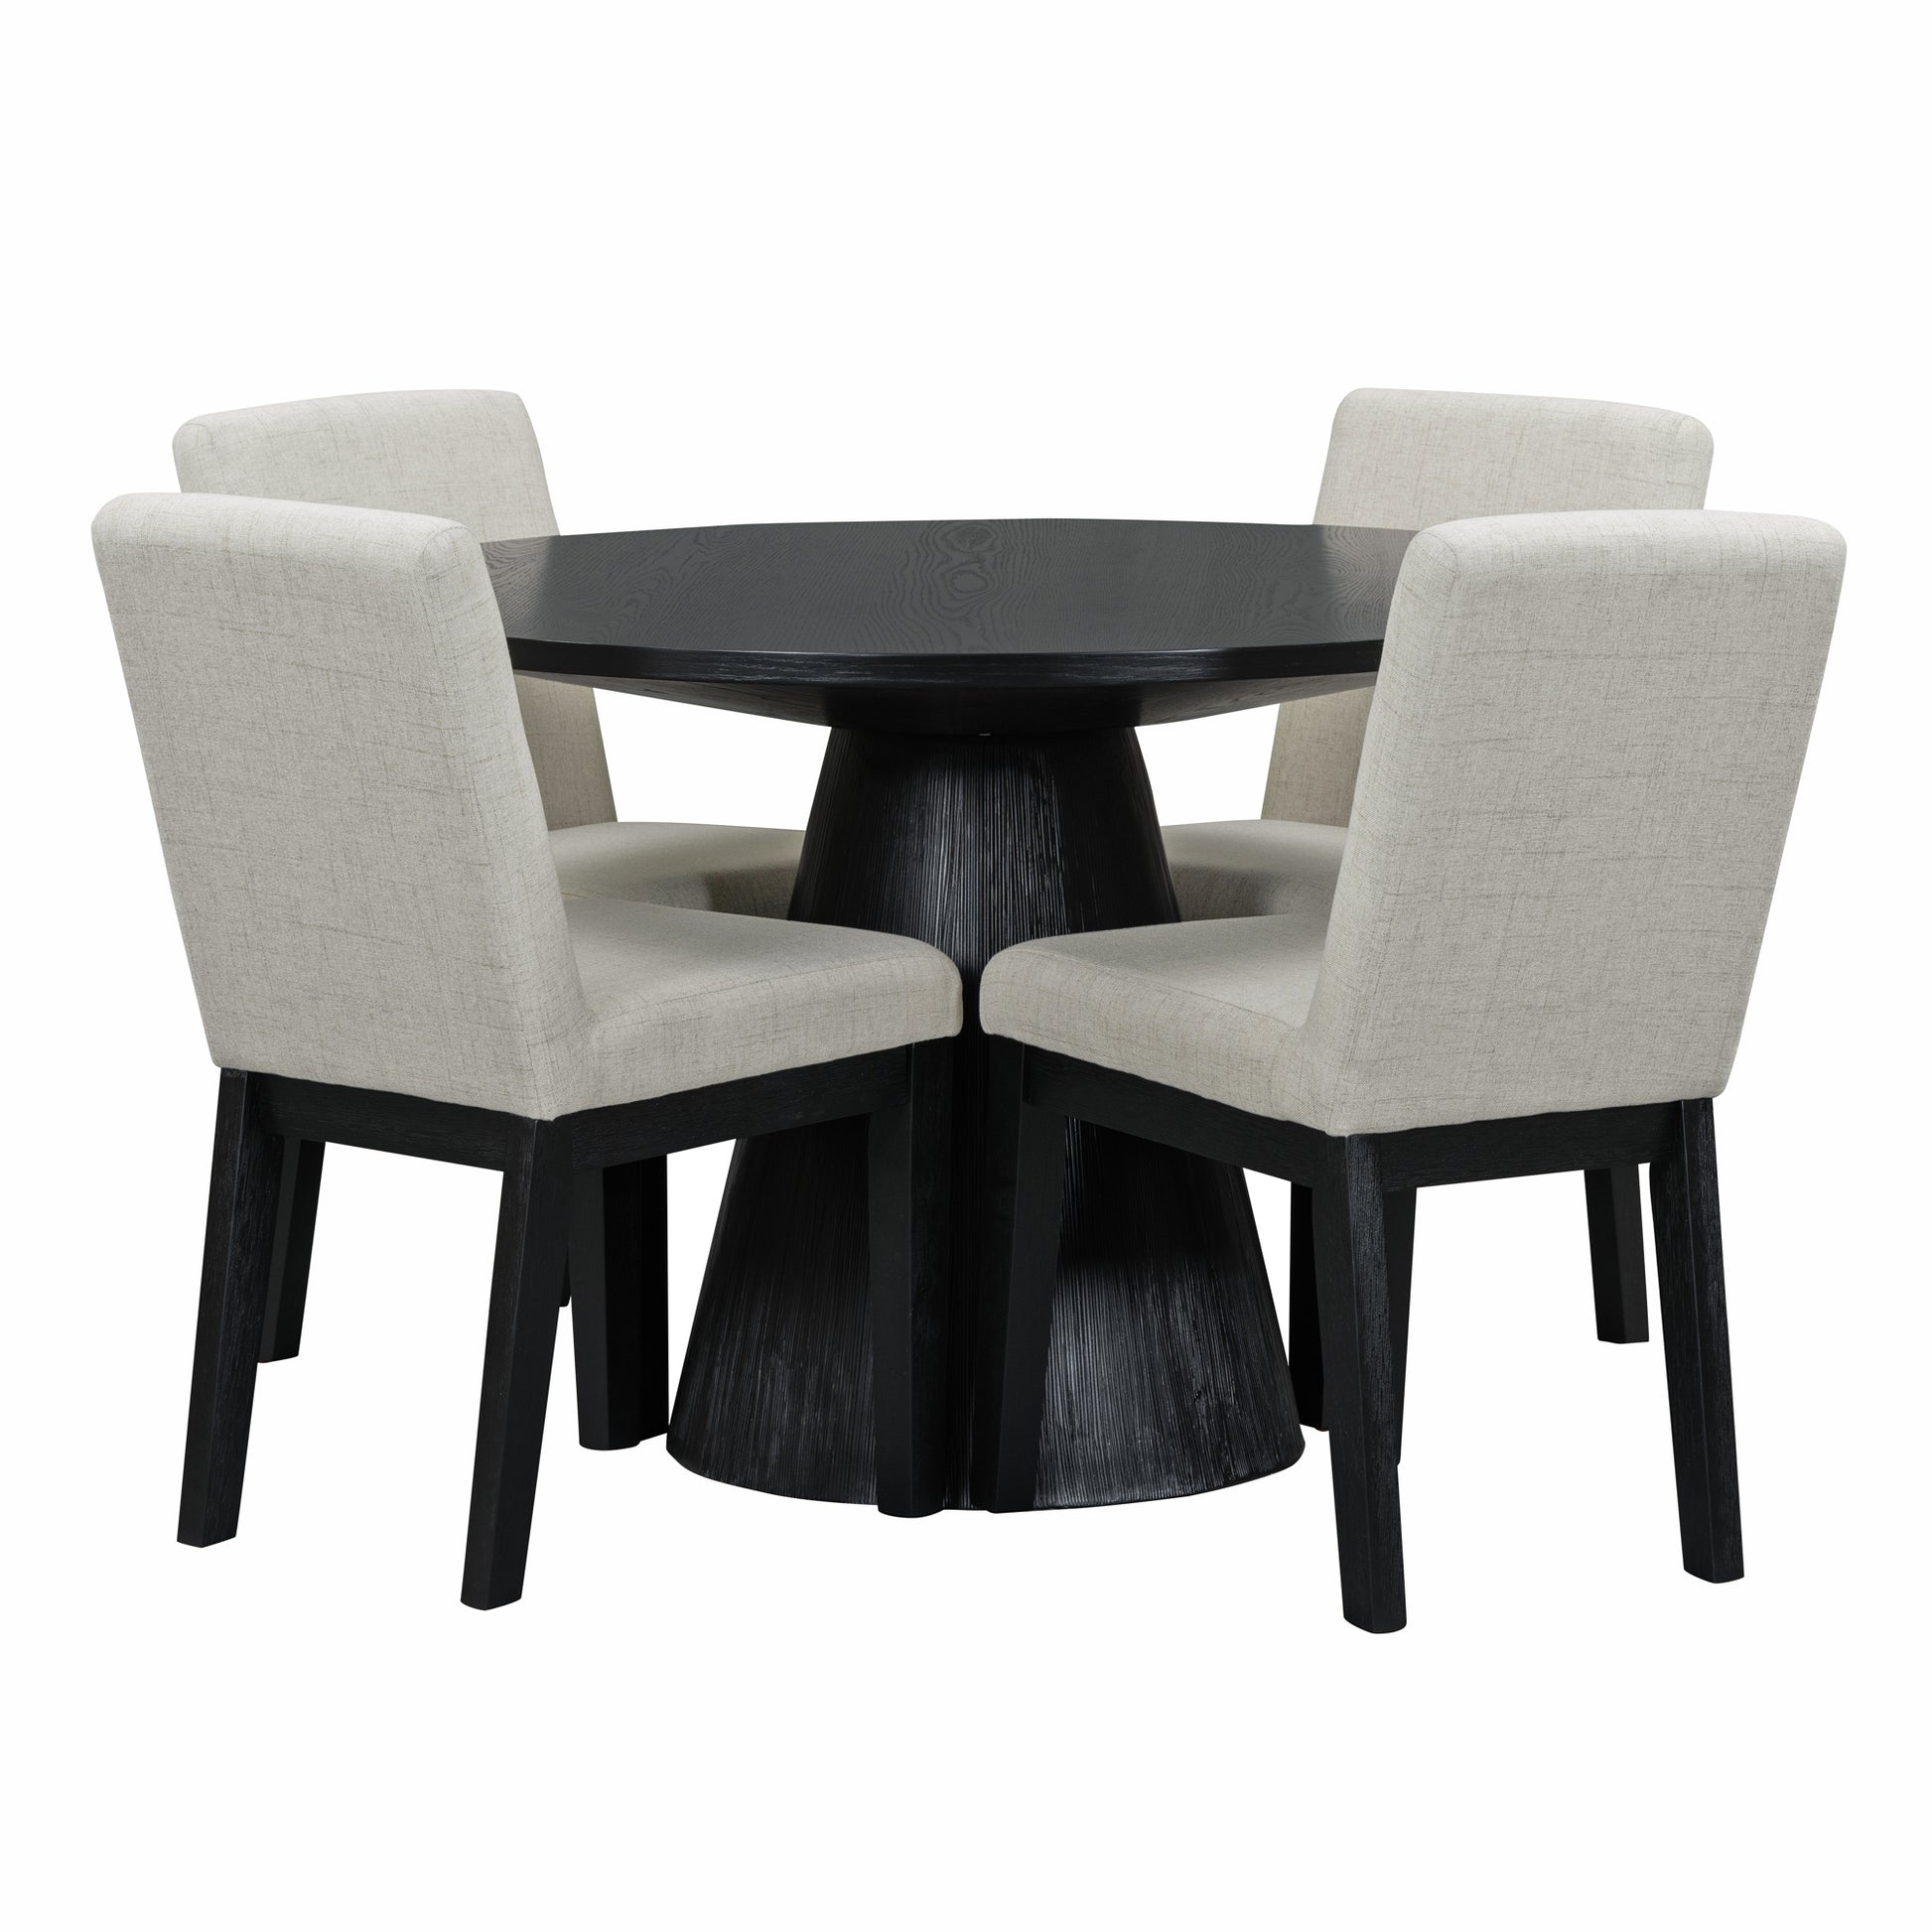 5 piece Dining Set Retro Round Table with 4 black-rubber wood